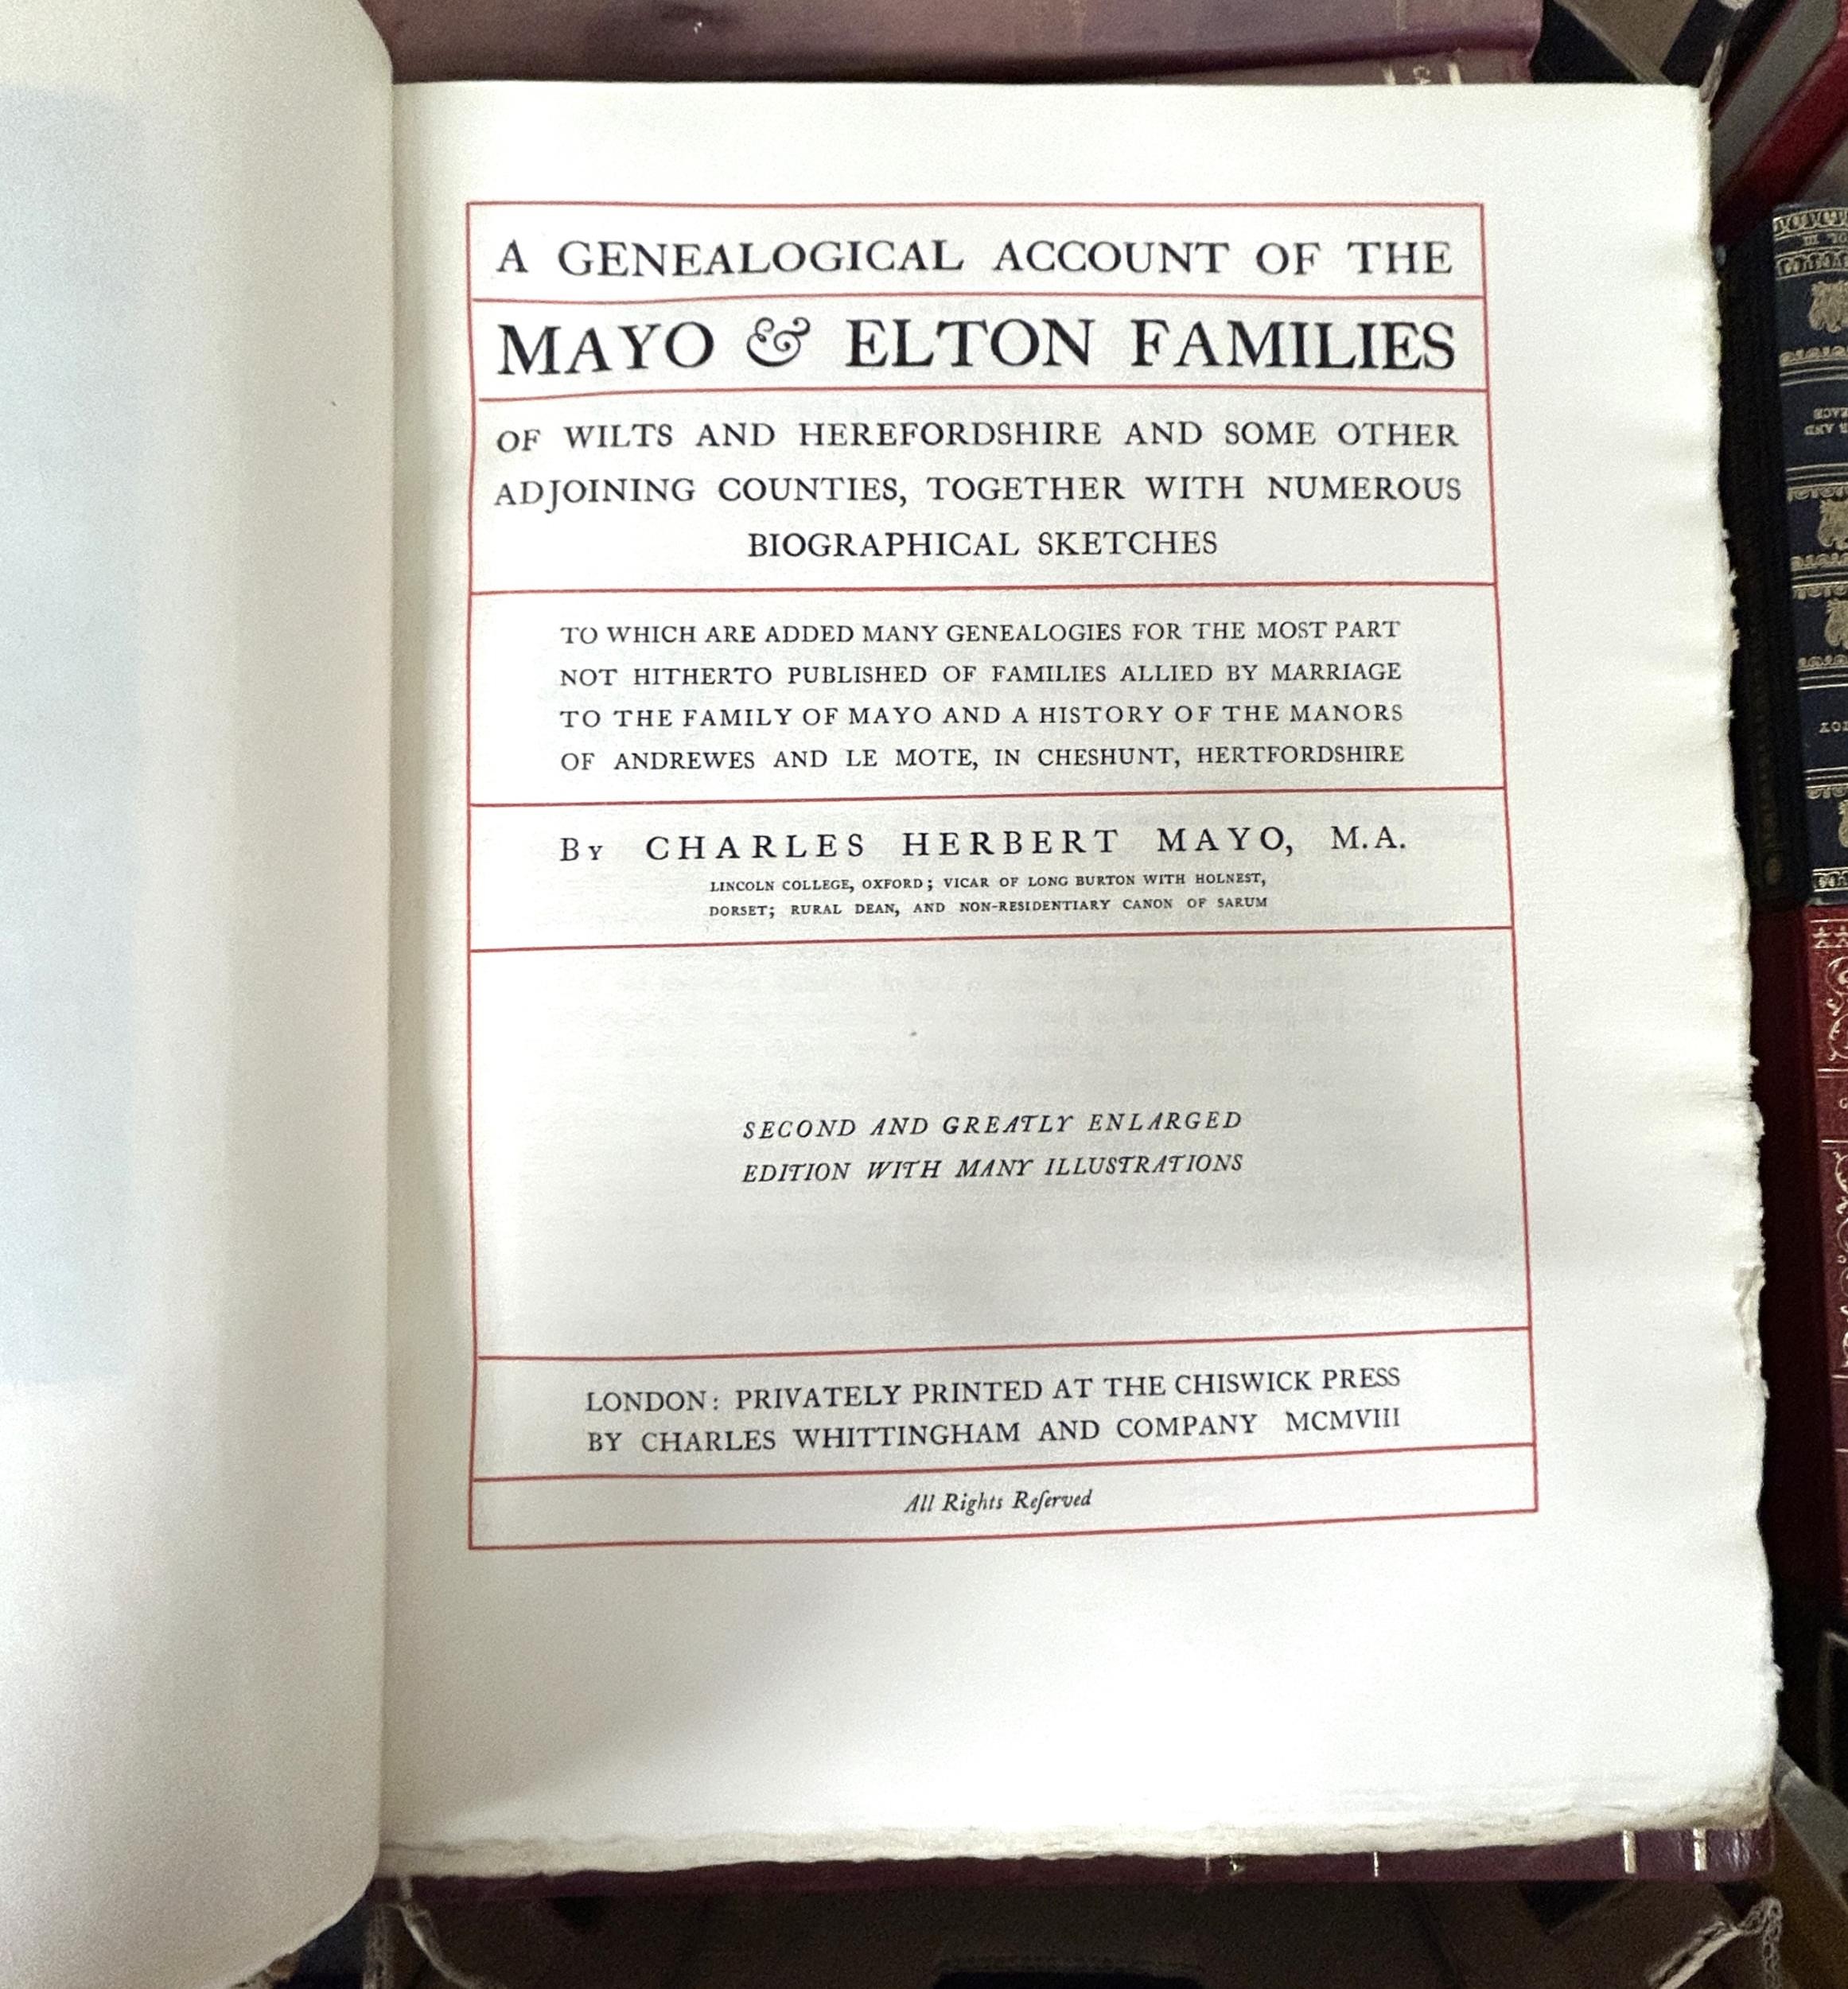 Herbert Mayo (Charles), A Genealogical Account Of The Mayo and Elton families, second edition, and - Image 2 of 5